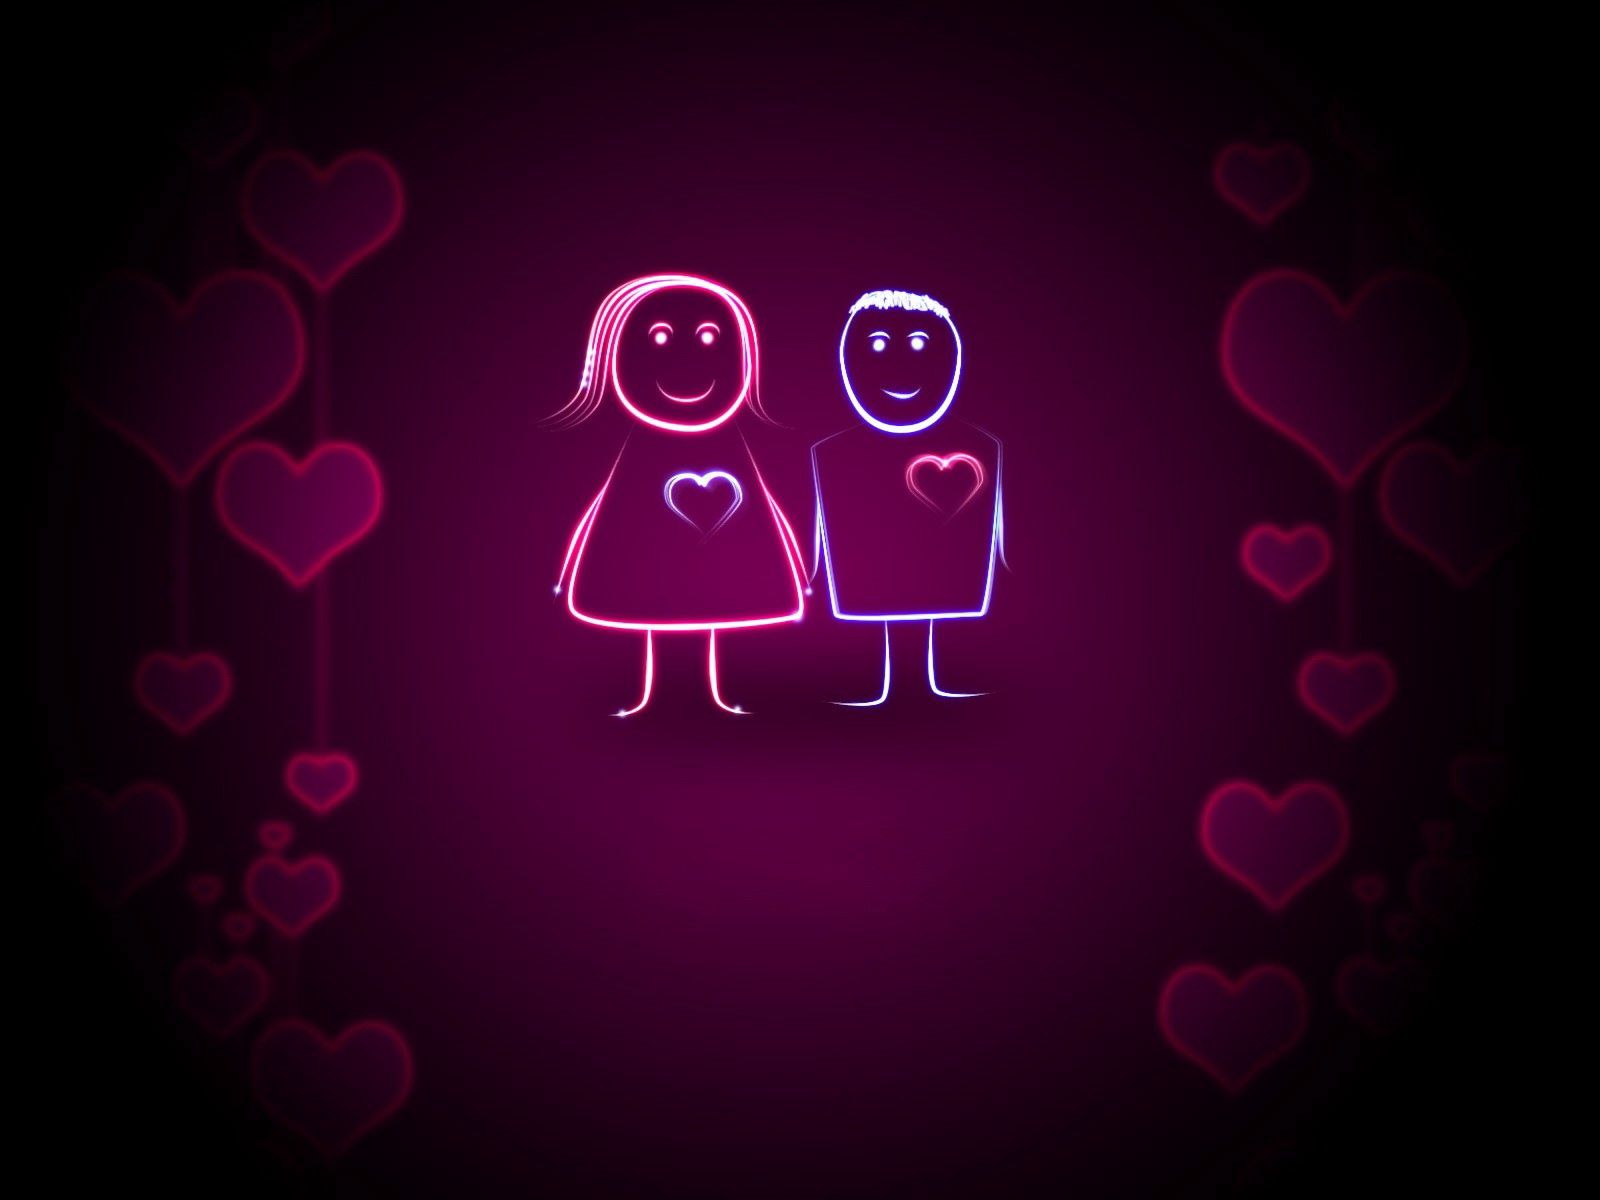 124023 download wallpaper love, couple, background, shine, light, pair, heart screensavers and pictures for free